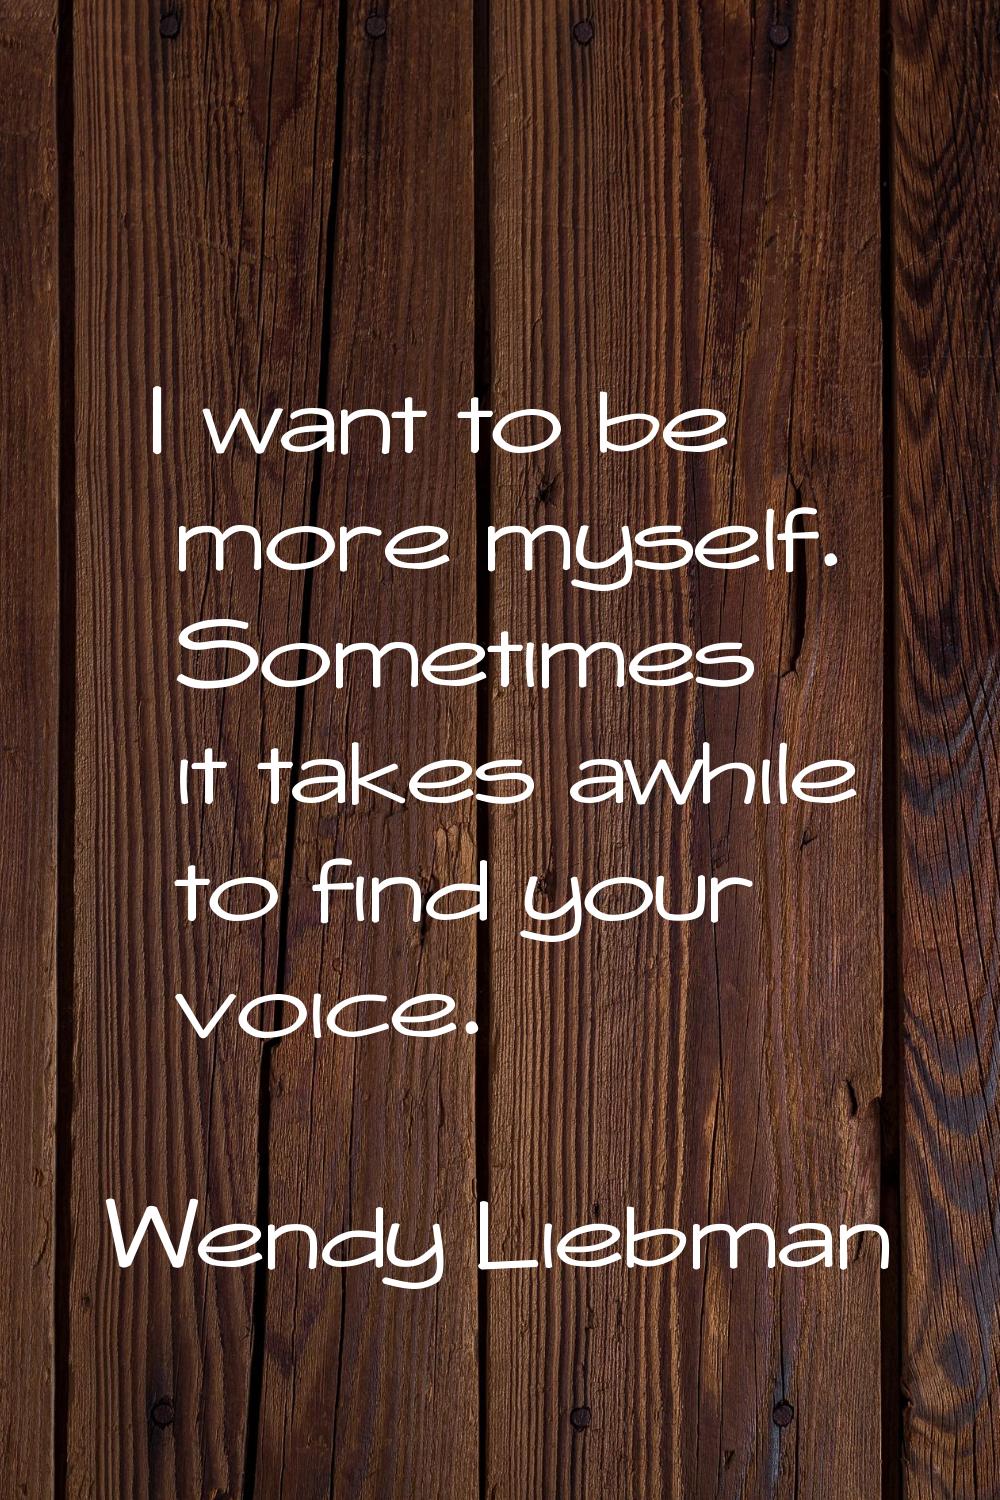 I want to be more myself. Sometimes it takes awhile to find your voice.